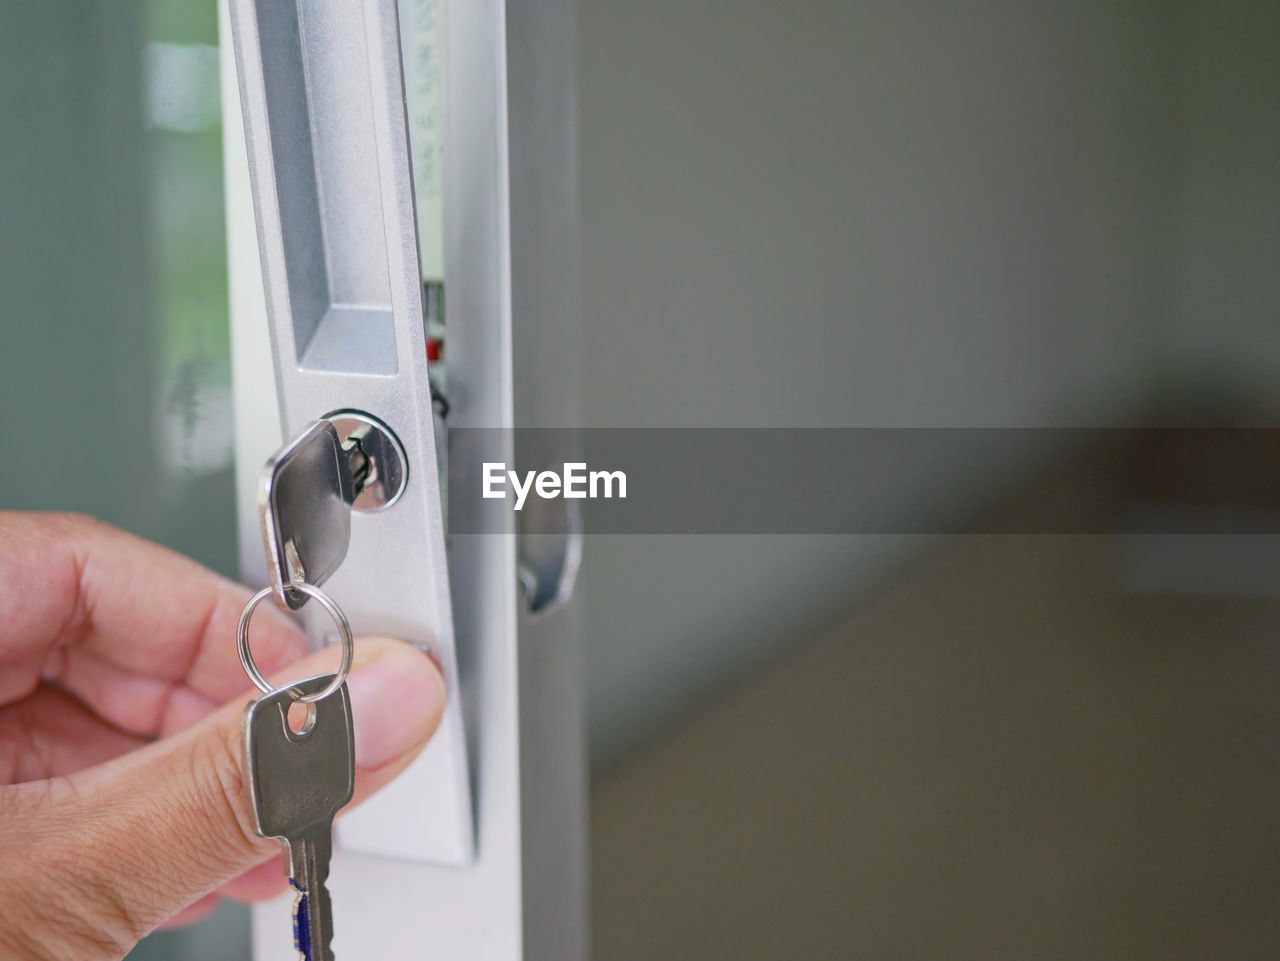 Cropped hands of person adjusting lock on glass door